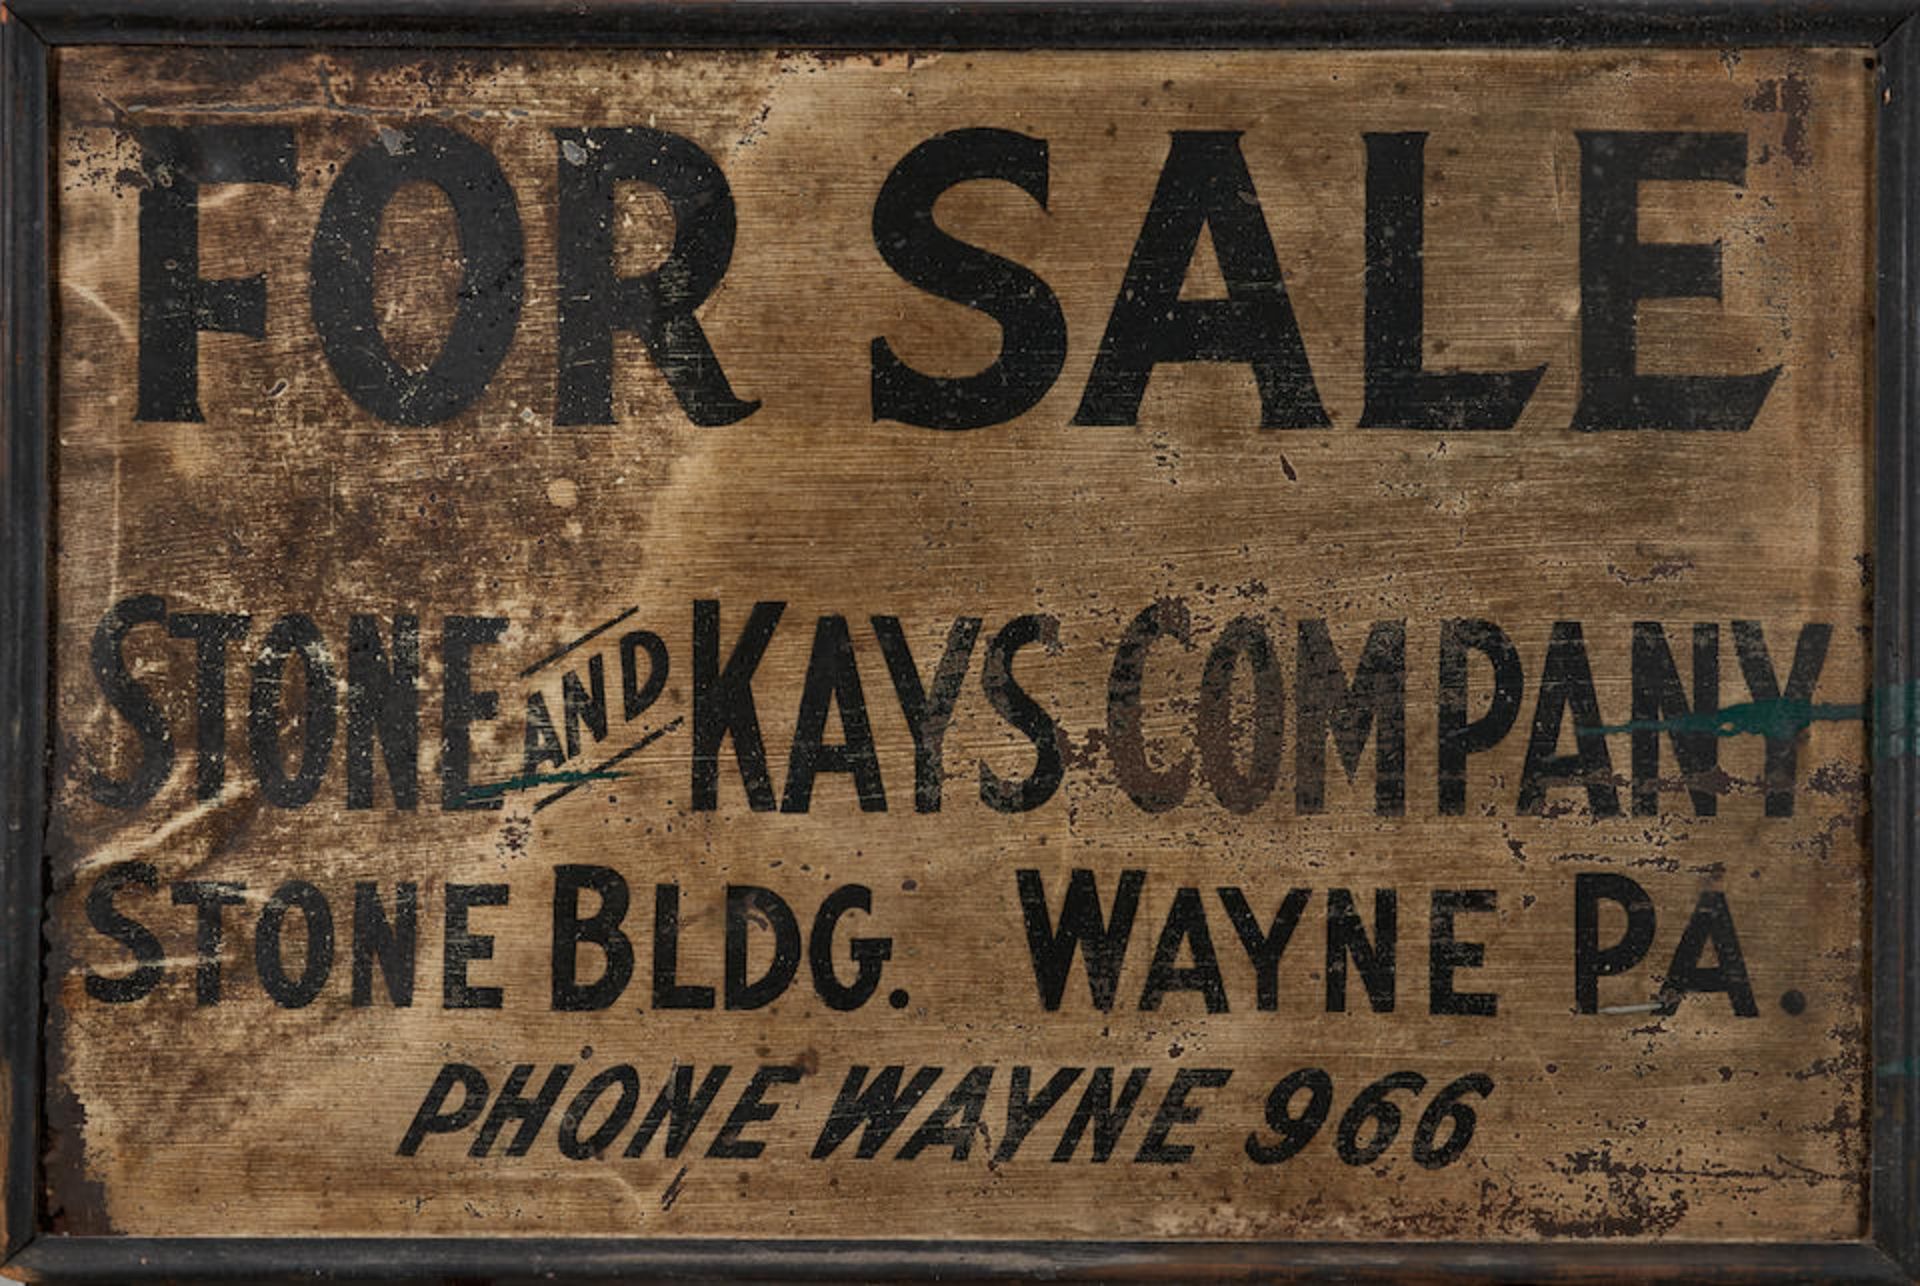 Painted Metal 'For Sale' Sign, Stone and Kays Co., Wayne, Pennsylvania, c. 1925.